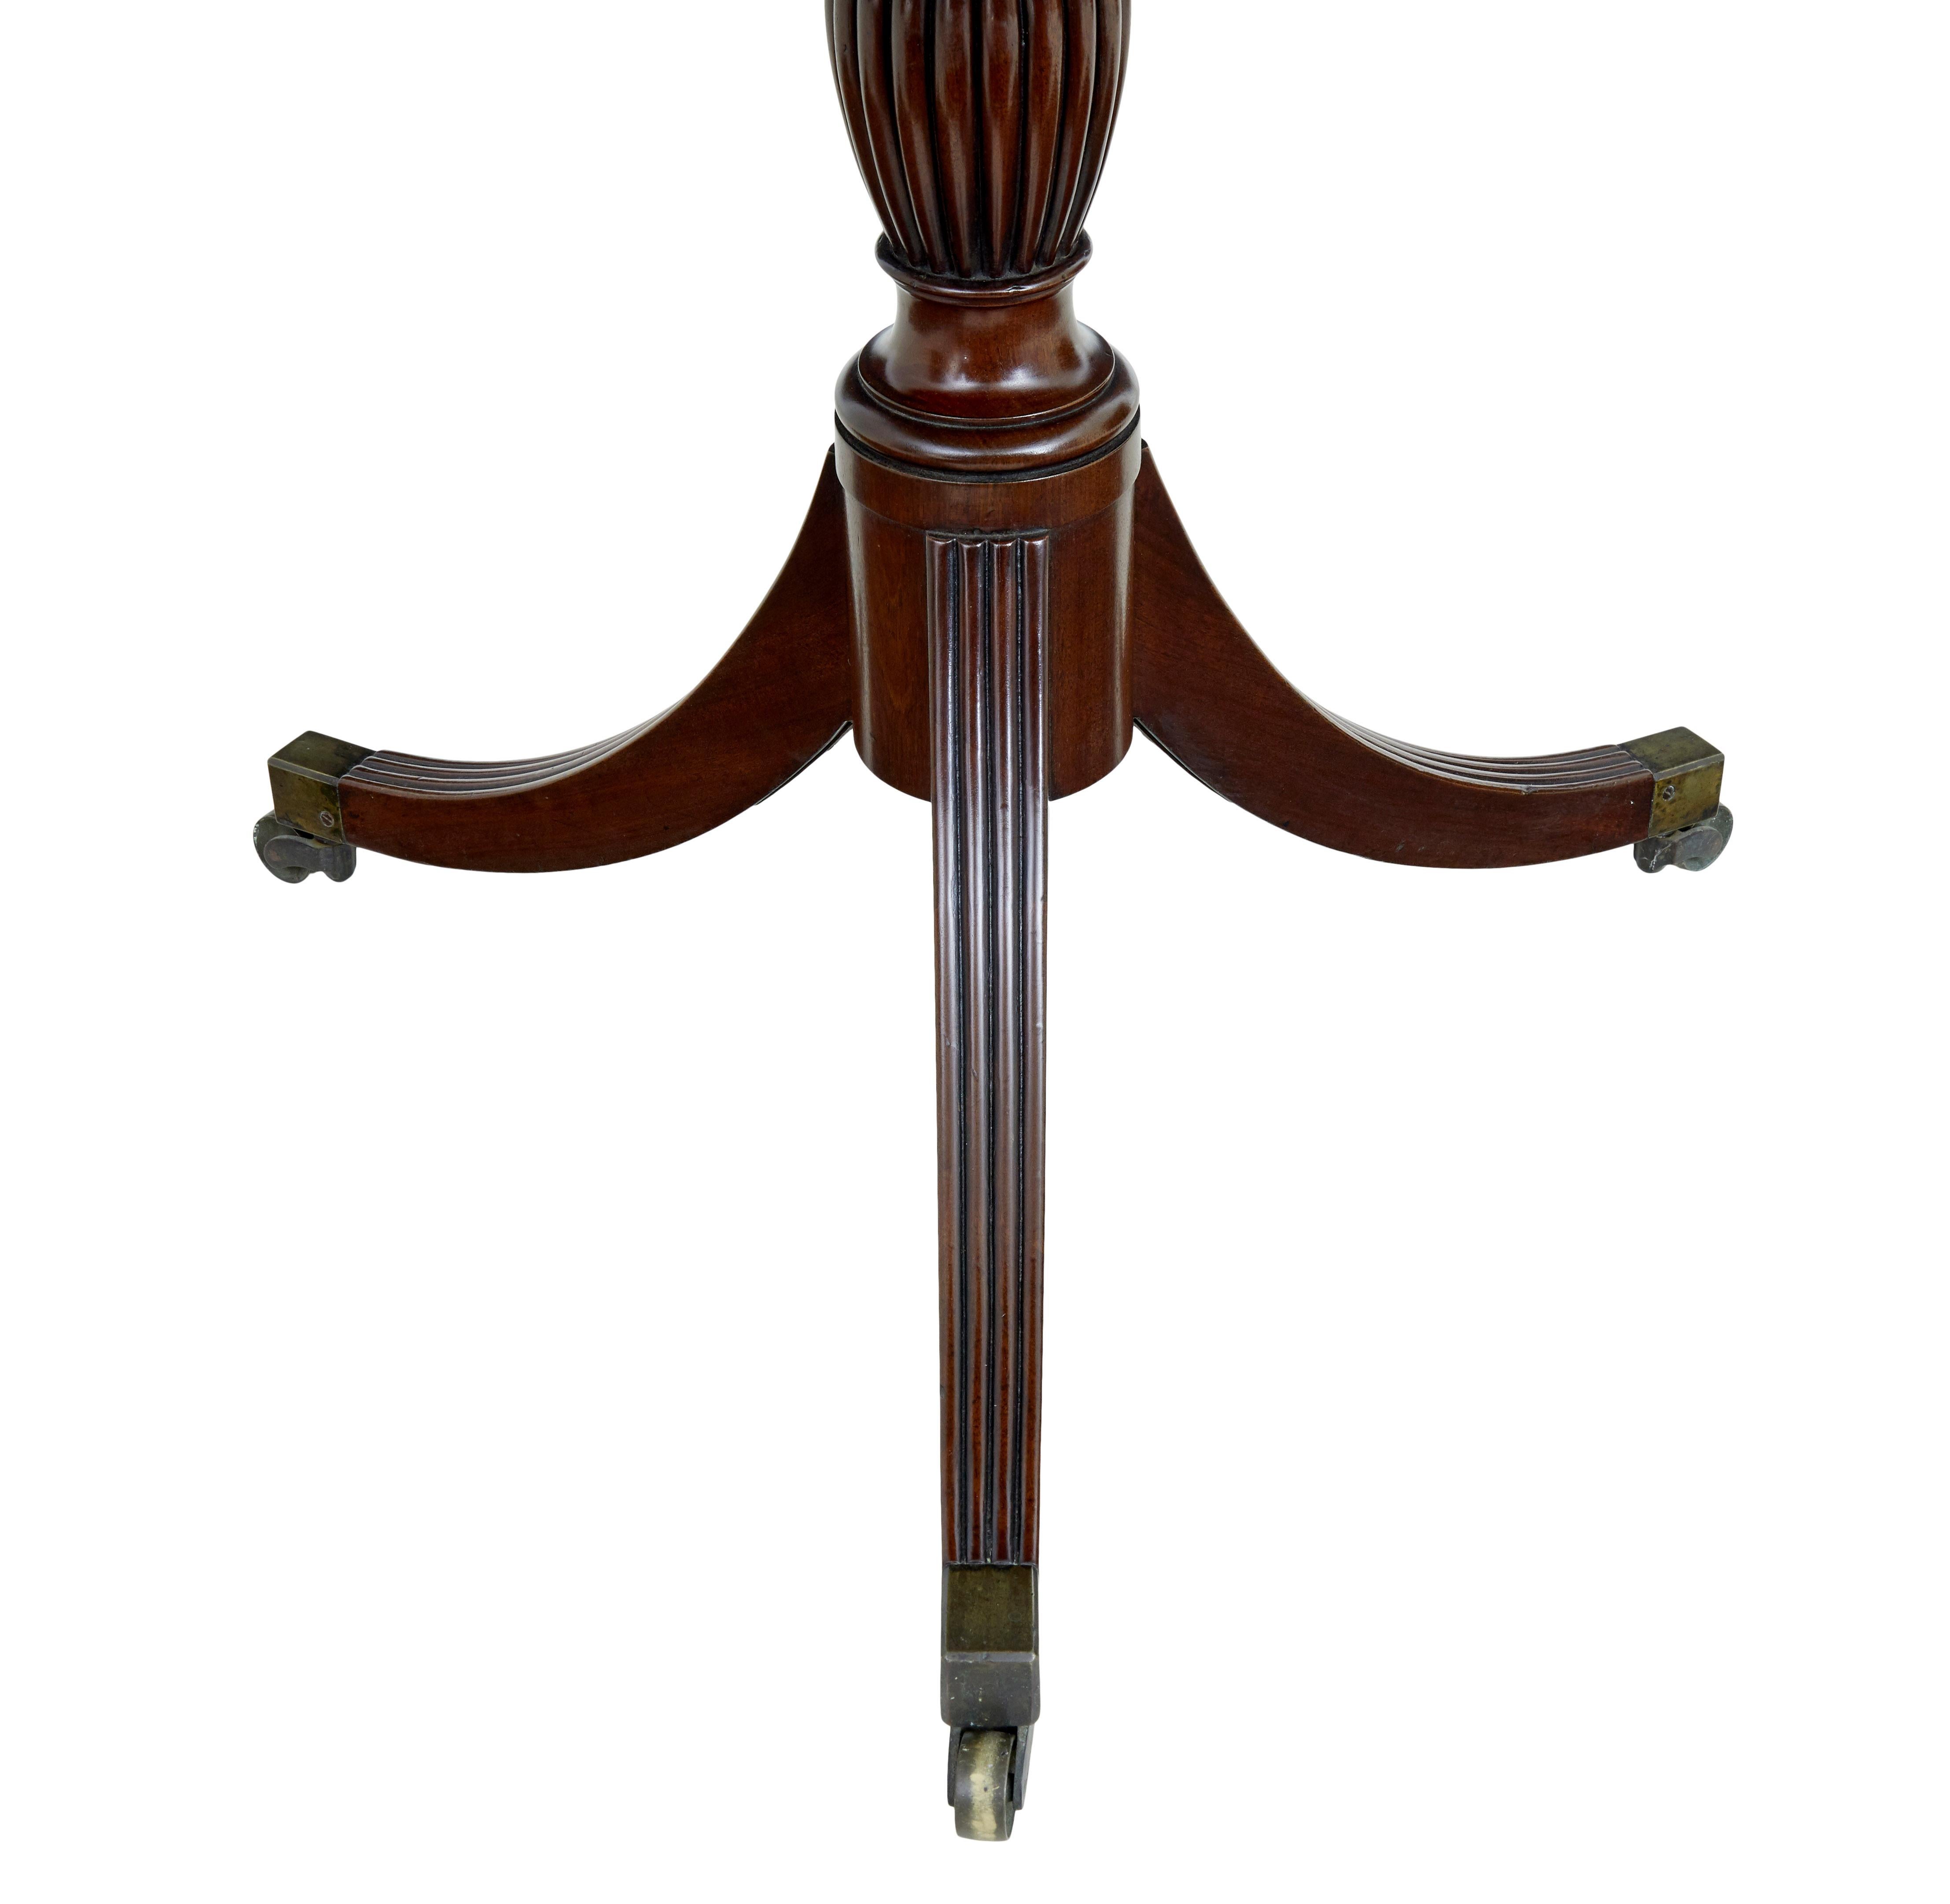 19th century William IV mahogany 2 tier dumb waiter circa 1830.

Good quality 2 tier dumb waiter with 2 circular surfaces with moulded edge.  Tiers united by a turned columns with fluted detailing.  Standing on 3 reeded legs with brass castors. 